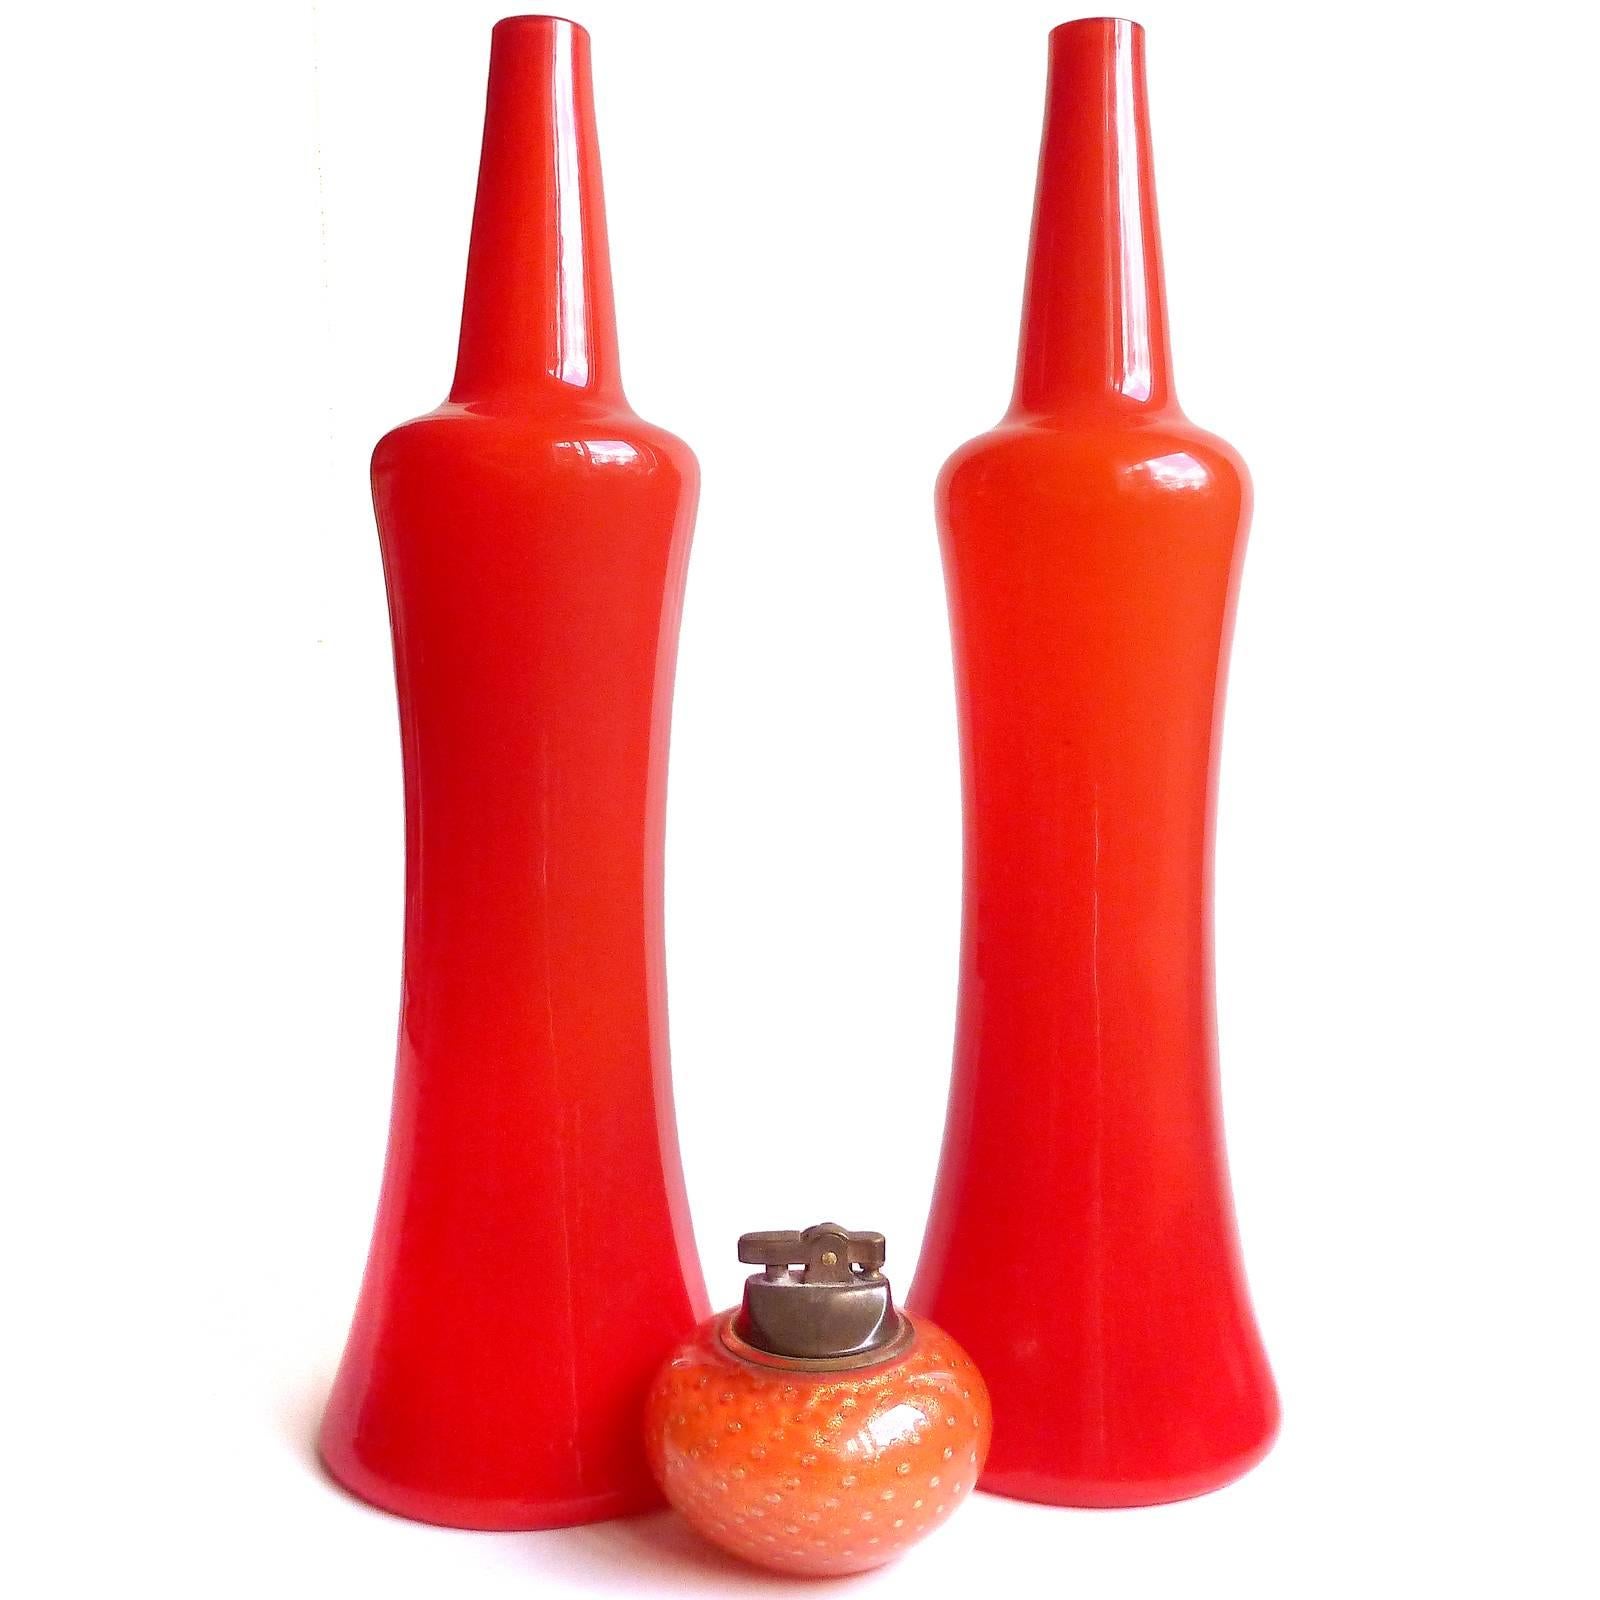 Large pair of Murano hand blown red over white Italian art glass rocket shaped flower vases with original labels. Documented to the Fratelli Toso company, with "Murano Glass - Made in Italy" labels underneath each of them. Could be turned